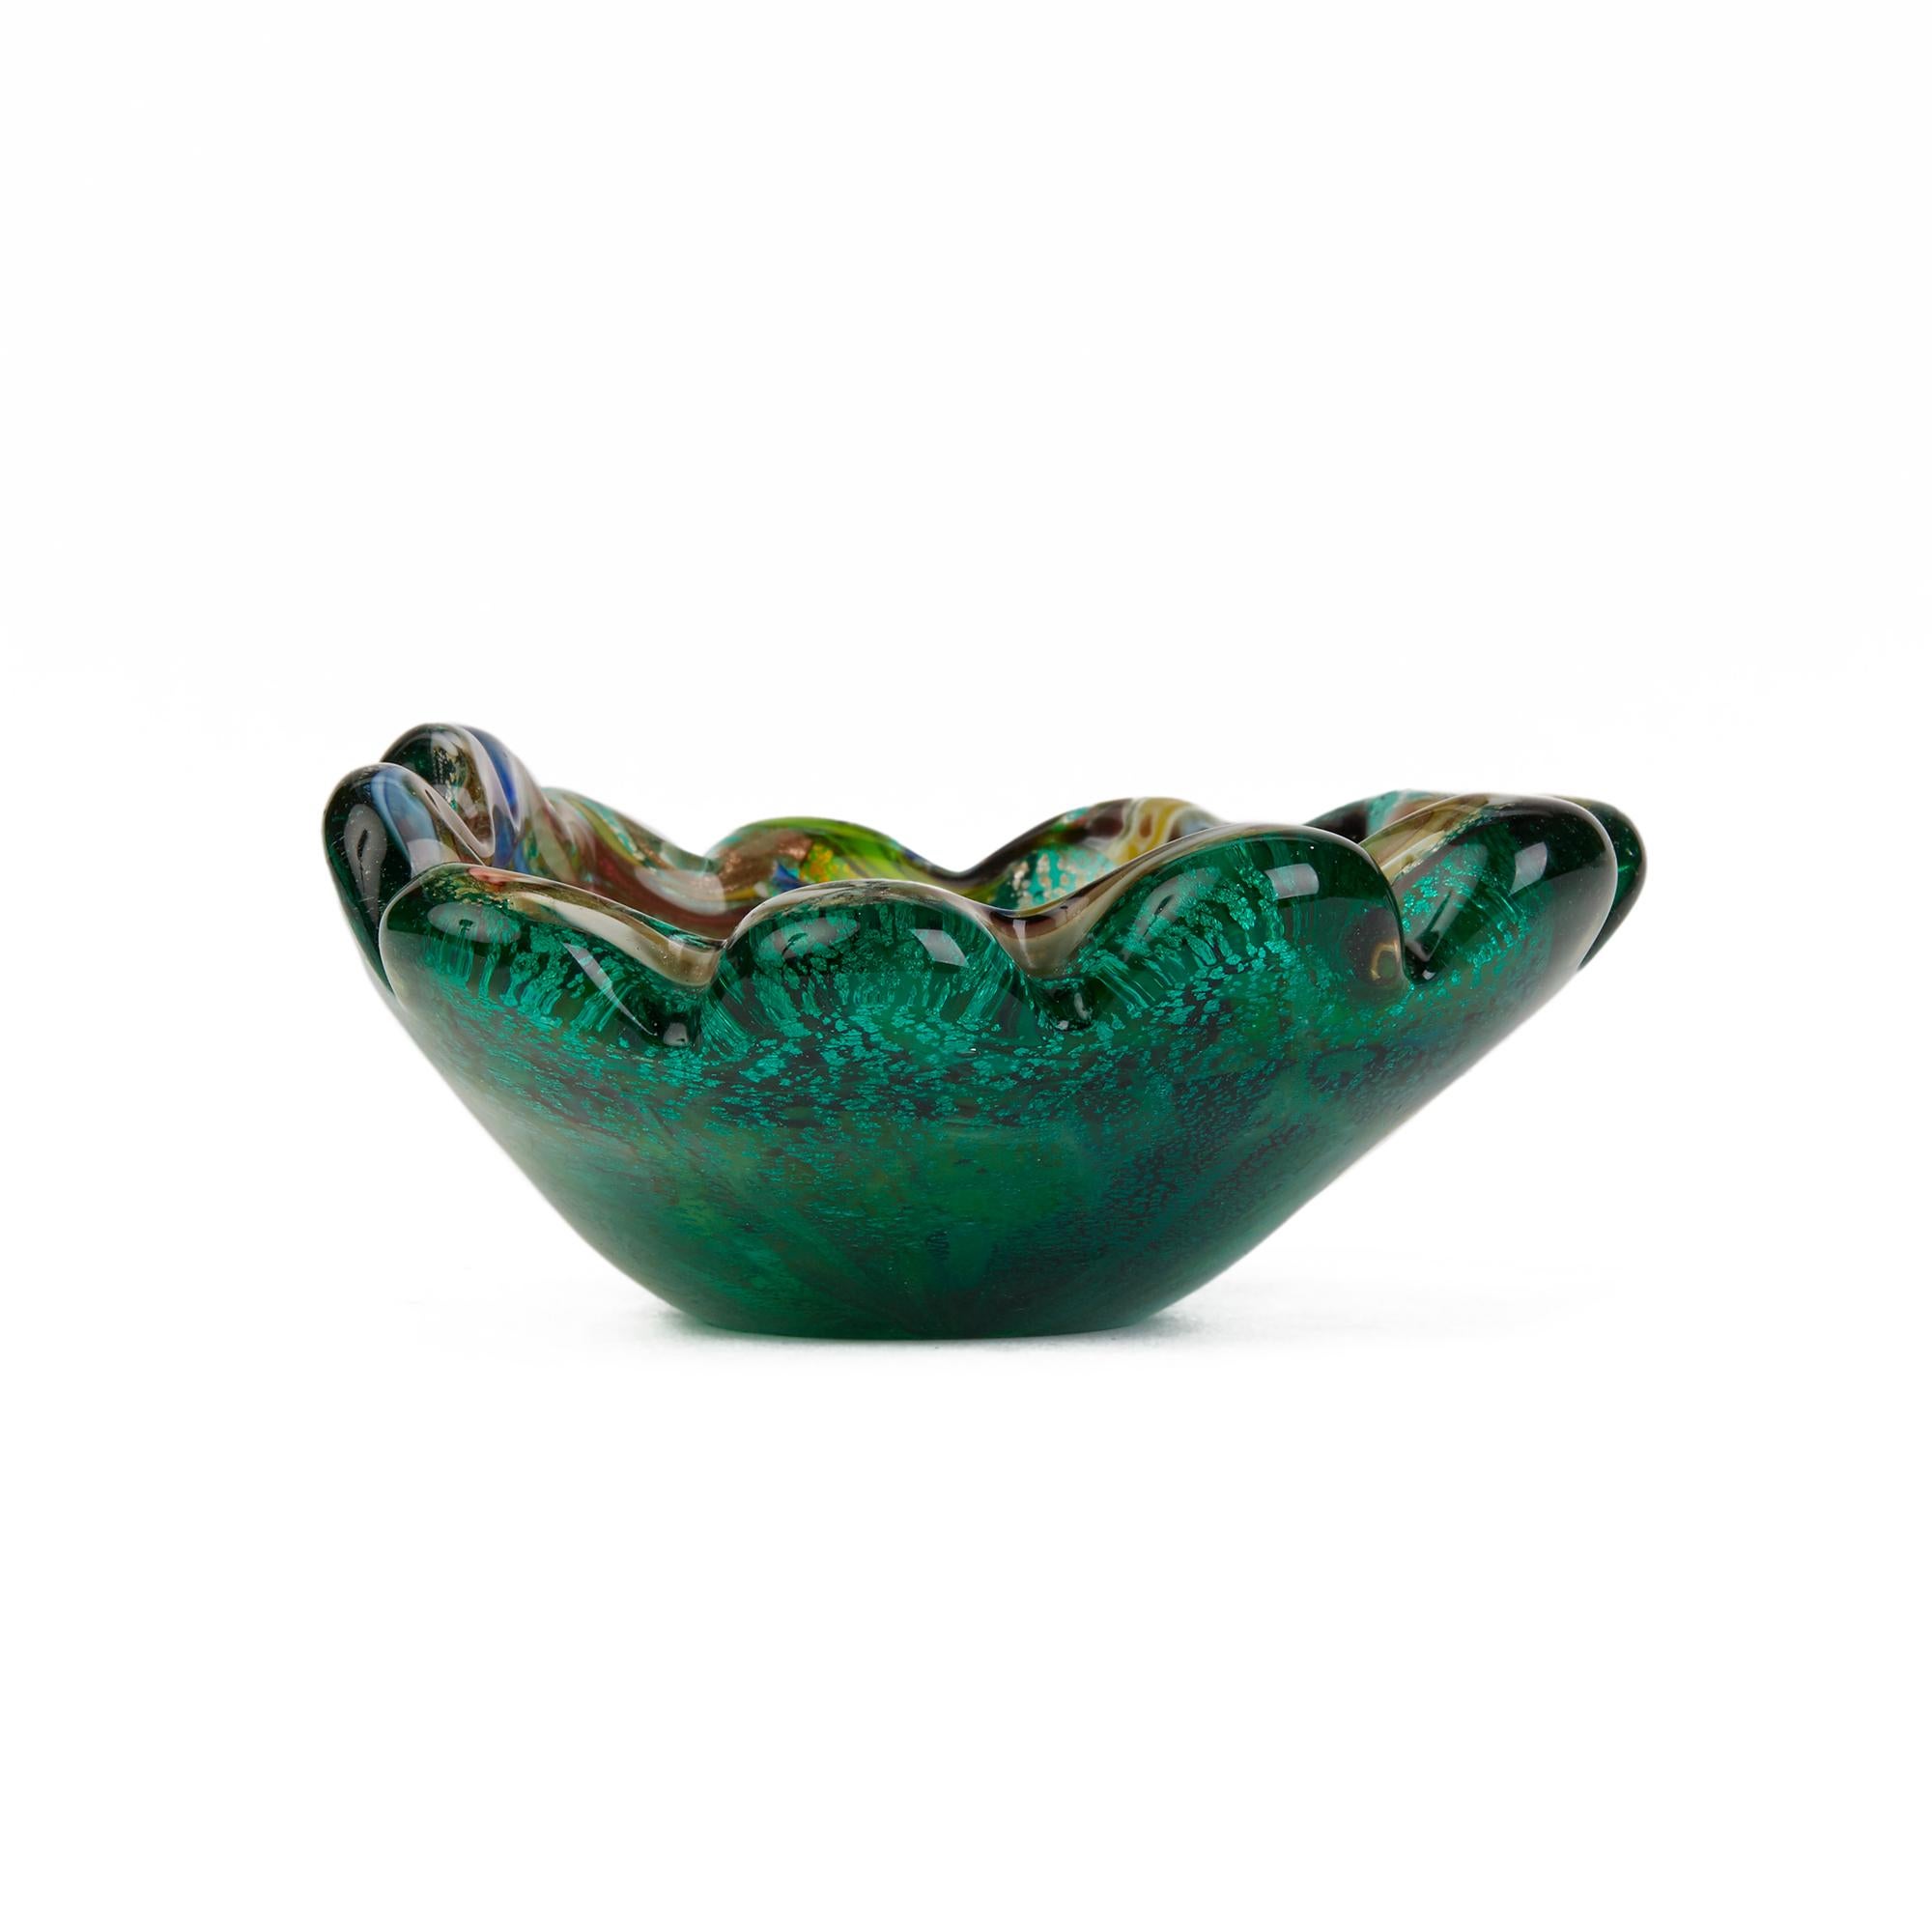 A stunning vintage Italian Murano Arte Vetrairia Muranese (AVEM) tutti frutti green glass dish of clam shell shape the inner bowl decorated with zanfirico polychrome and filigree canes on a scattered silver aventurine ground. The bowl is thickly